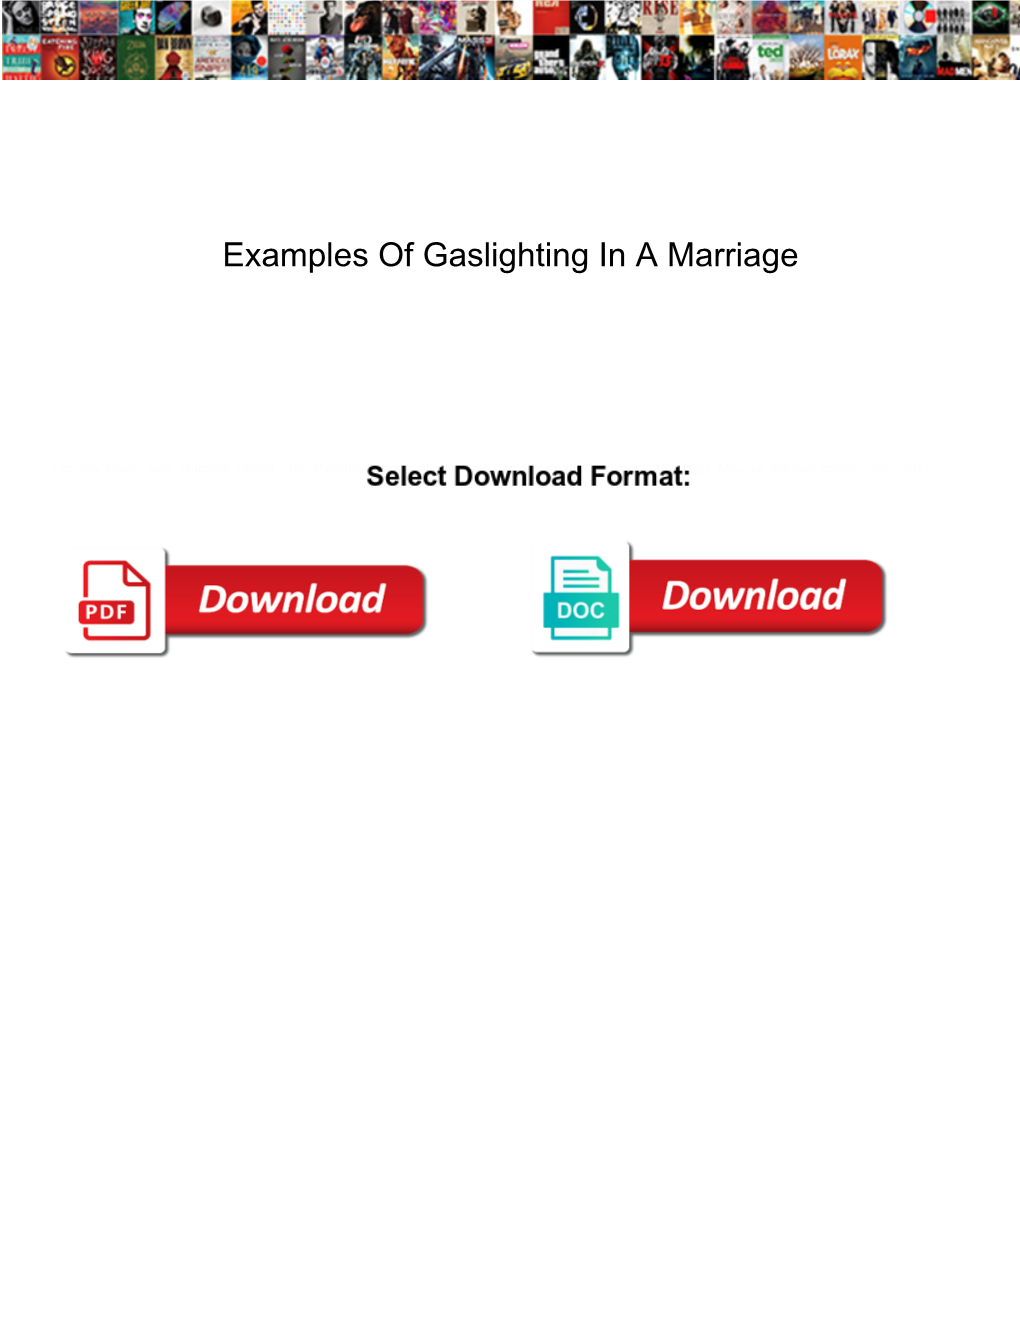 Examples of Gaslighting in a Marriage